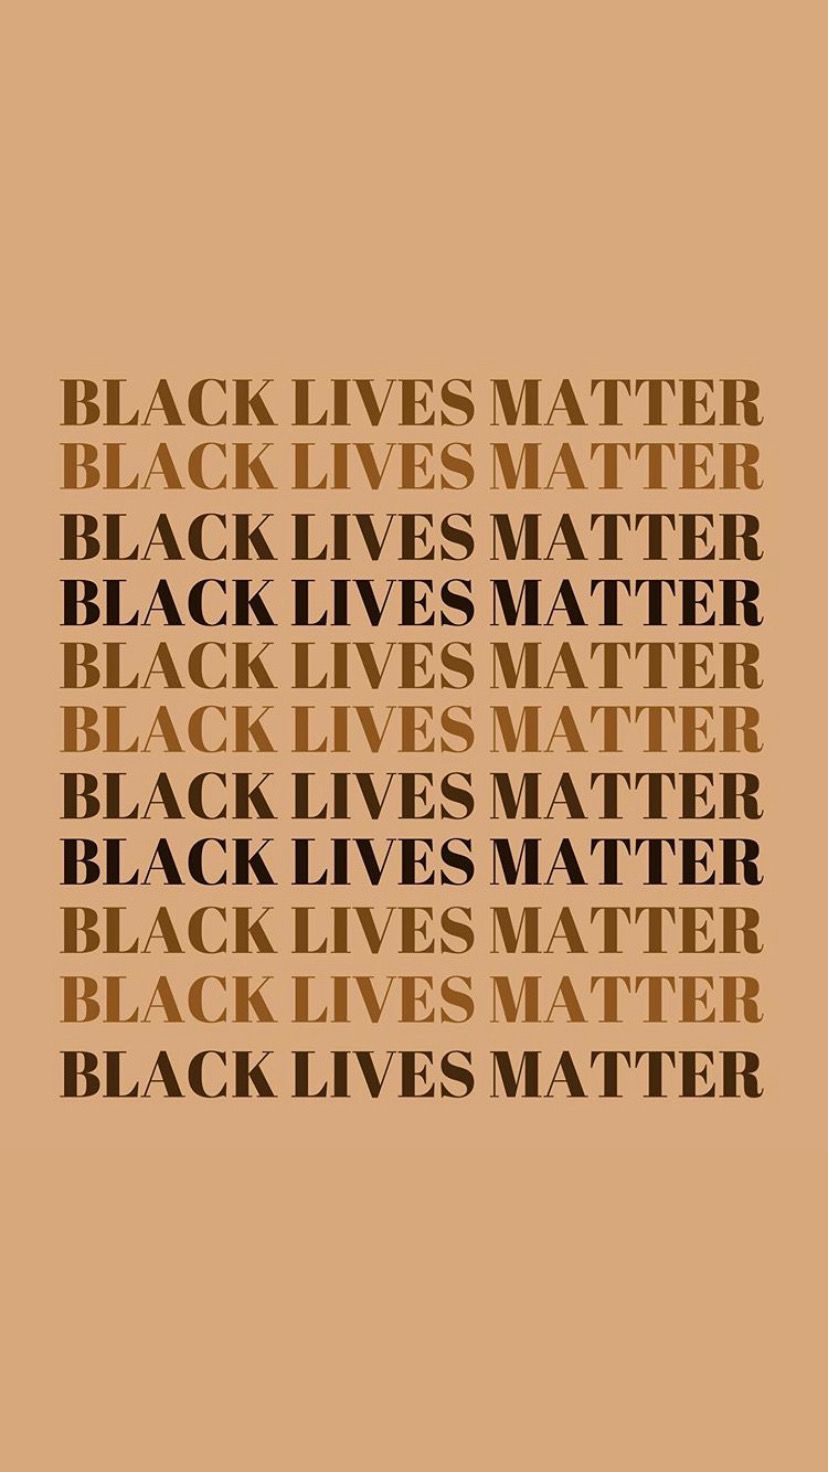 Coping With Racial Events in the News Diana. Black lives matter art, Black lives matter movement, Black lives matter